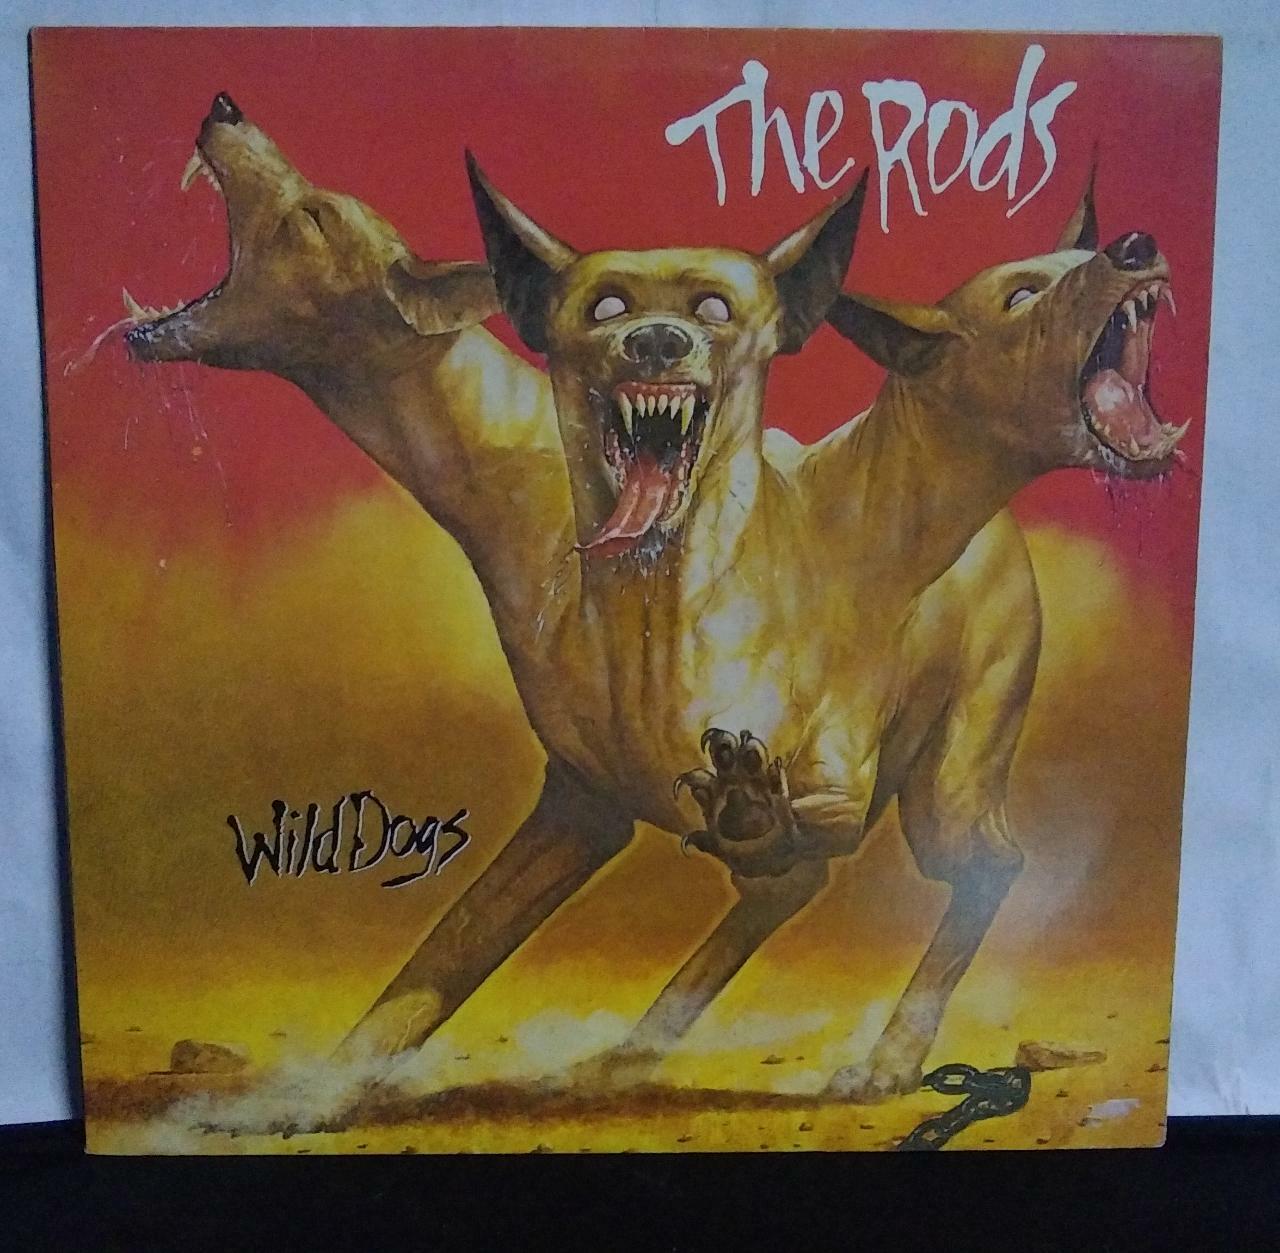 Vinil - Rods the - Wild Dogs